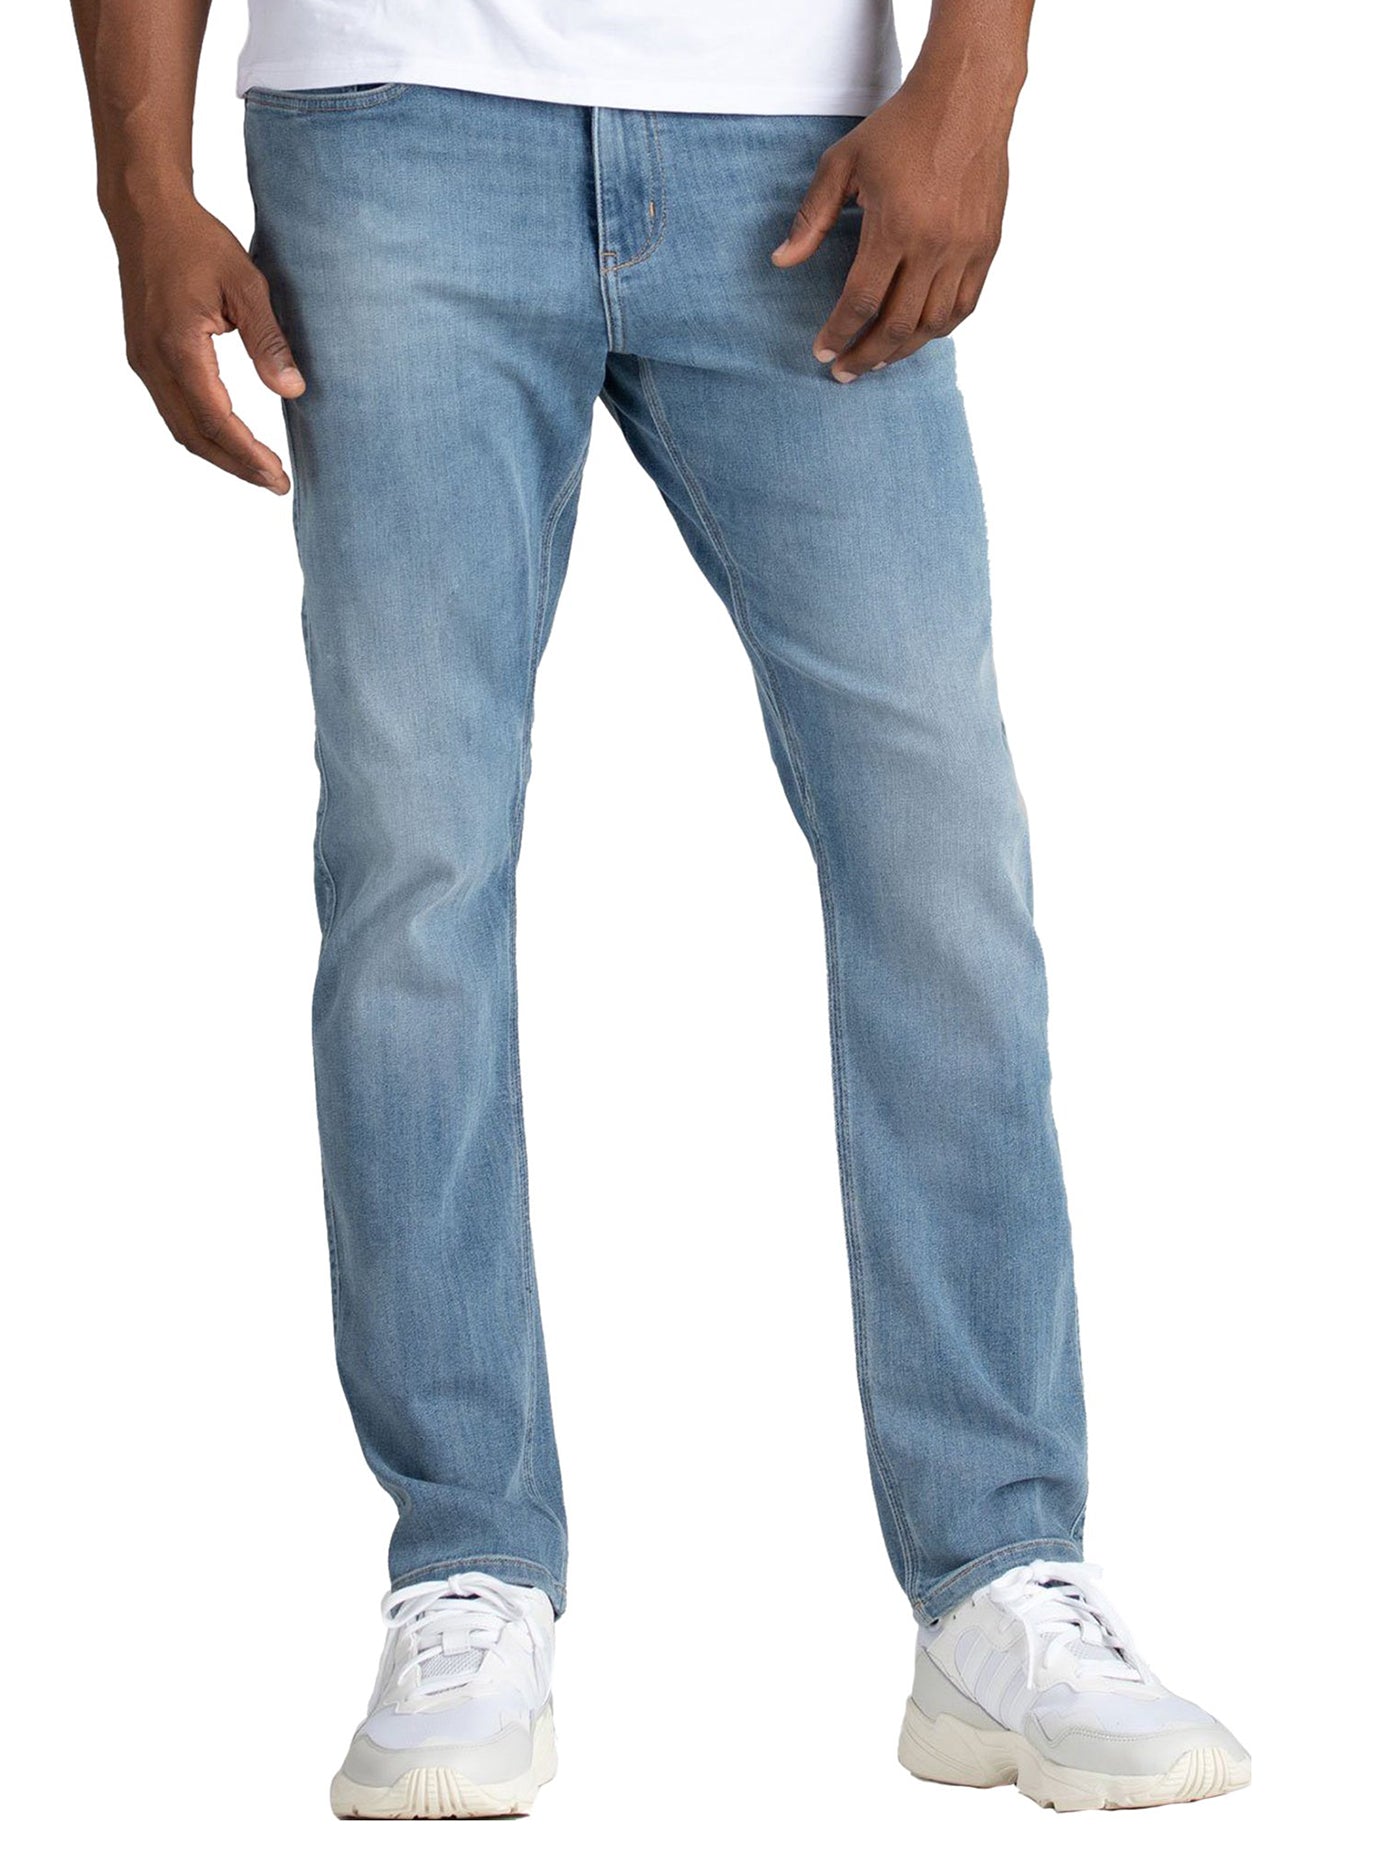 Duer Performance Denim Relaxed Jeans